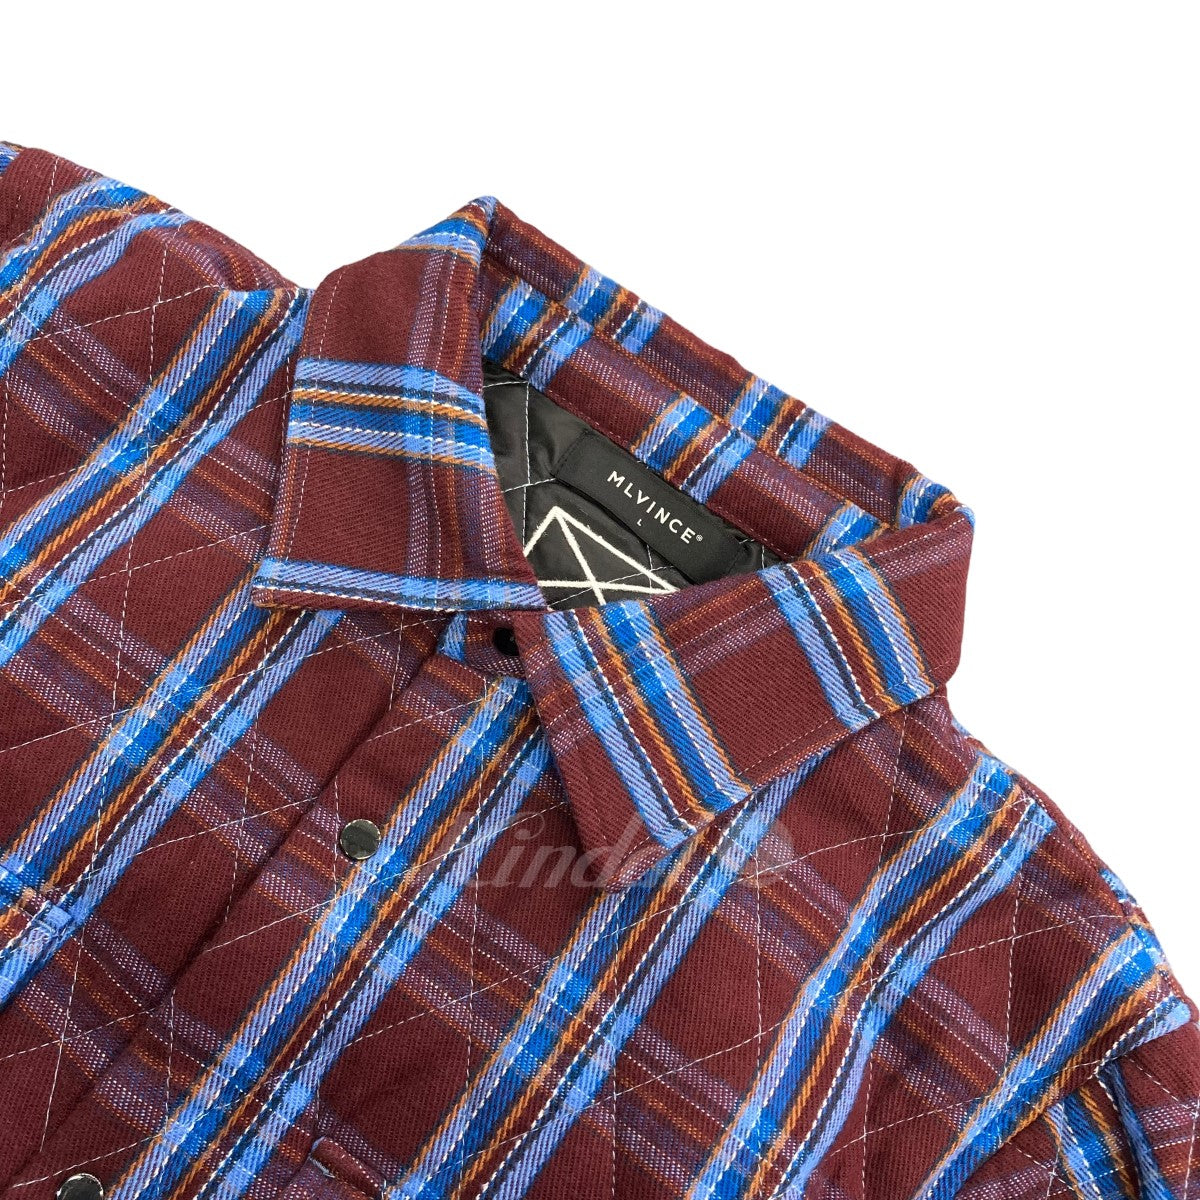 MLVINCE(メルヴィンス) 「QUILTED CHECK SHIRTS JACKET」 チェック柄シャツジャケット